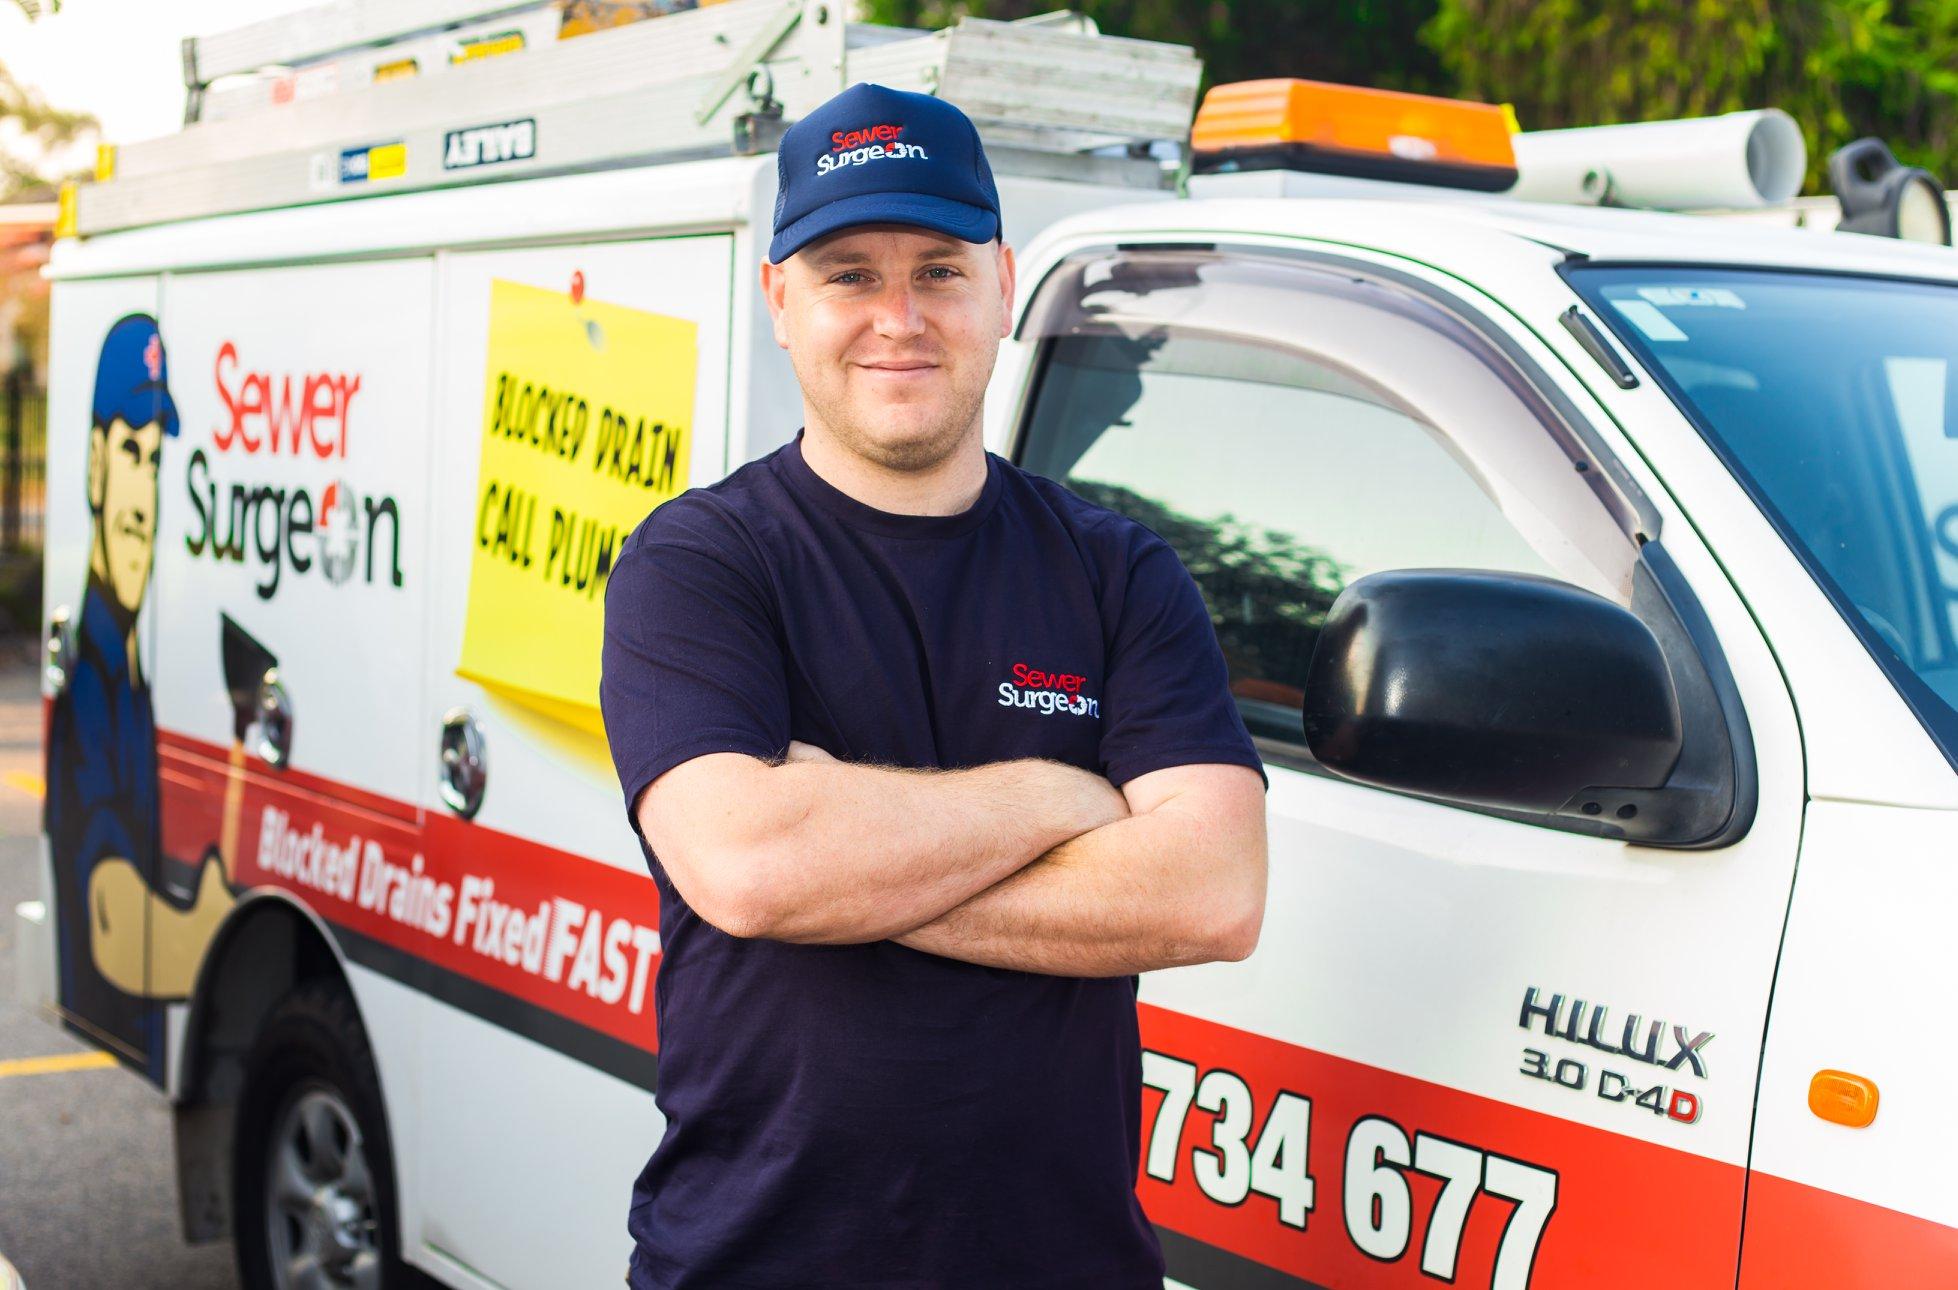 North Shore Sydney Emergency Plumber Fixes Burst Pipes, Drains & Much More